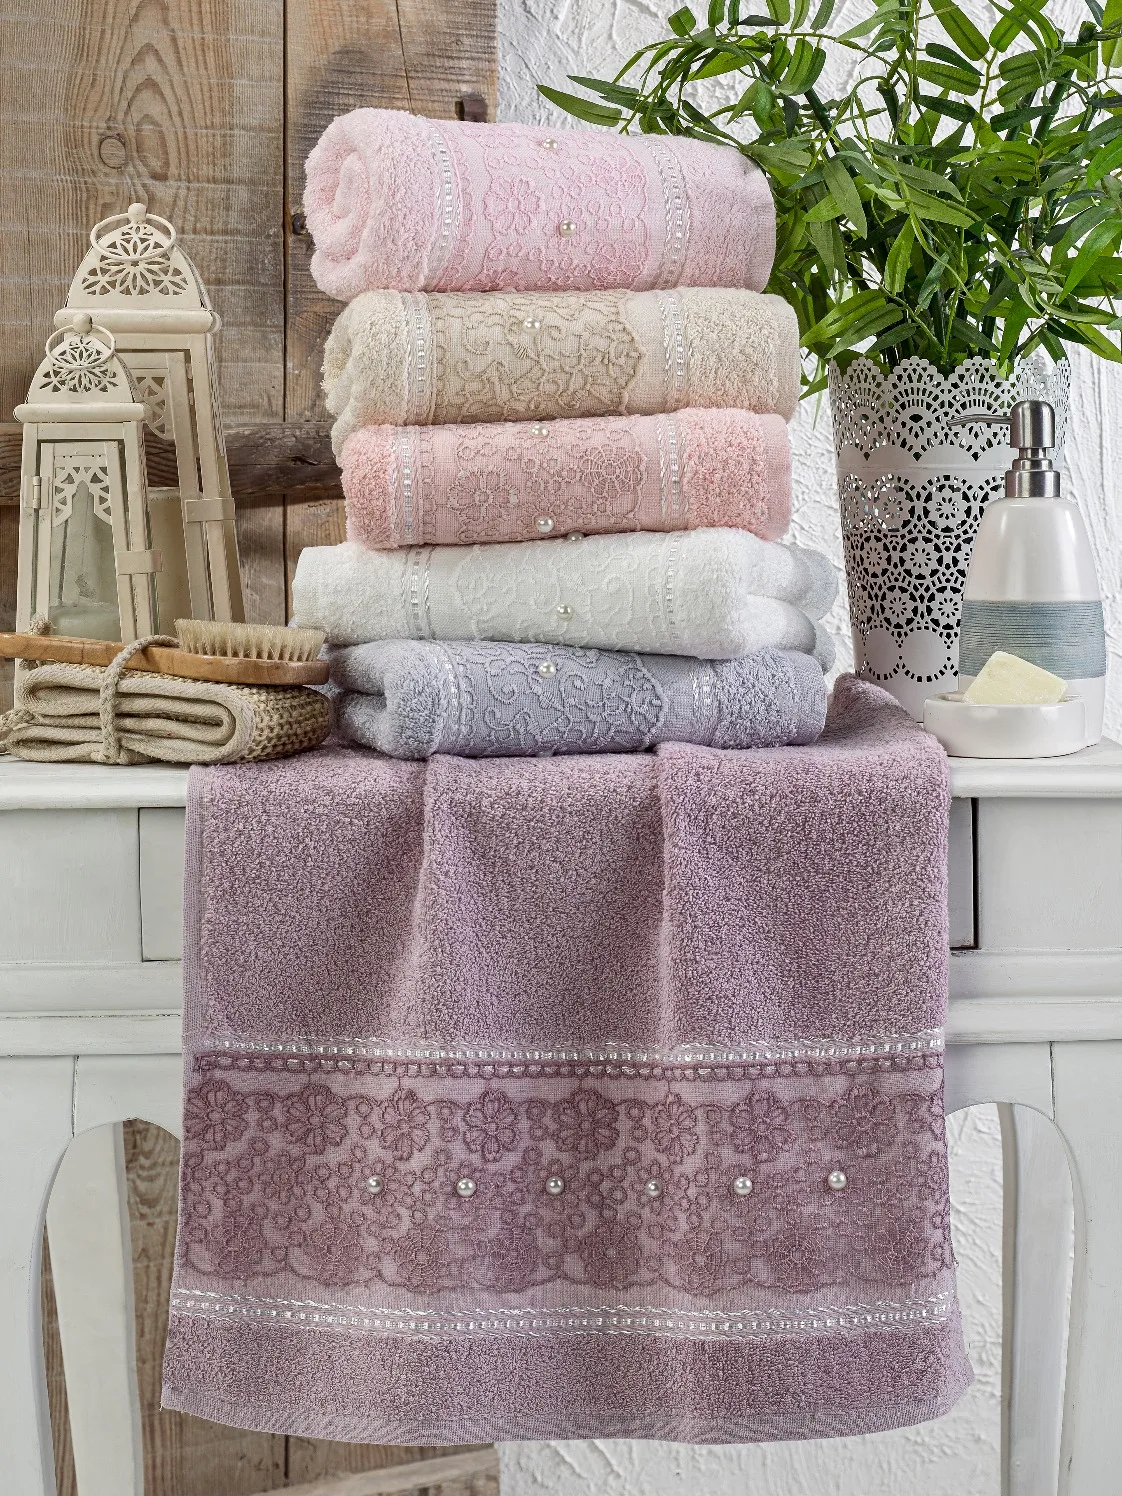 

Organic Cotton %100 Home Supplies Soft Face/Hand Towel Thick Absorbent Cloth Dishcloths Hanging Cloth Home Accessories 50*90cm